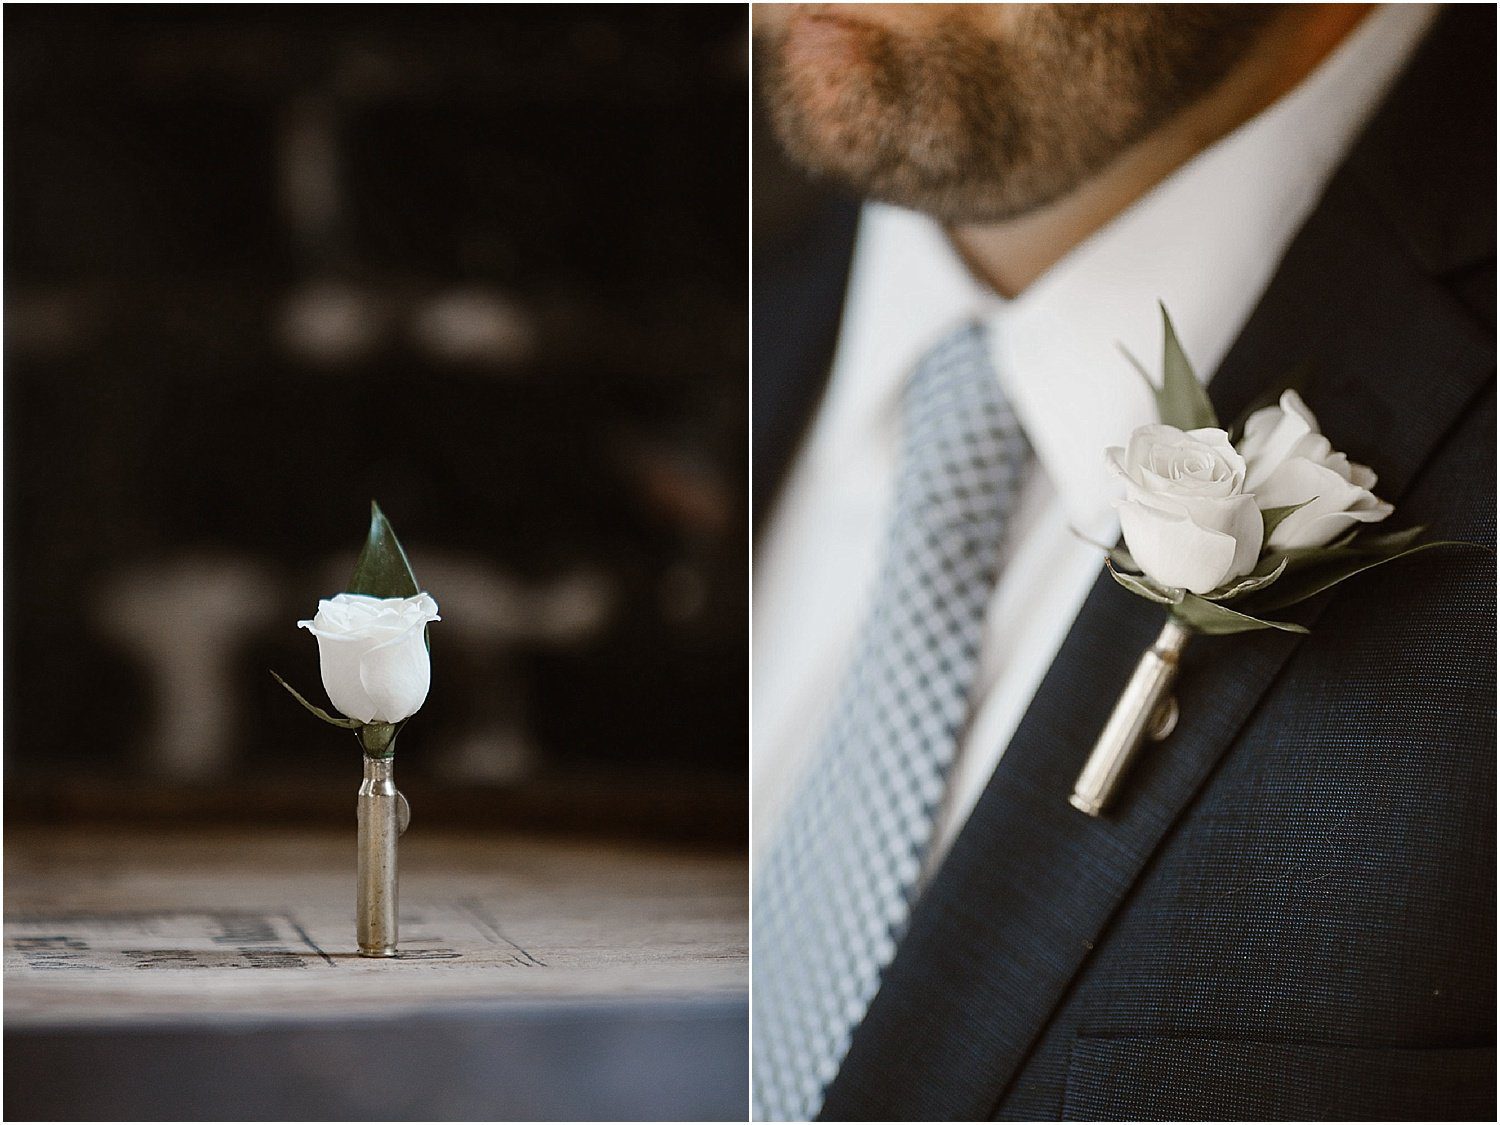 Bullet Shell Boutonniere | Bullet Casing Boutonniere 